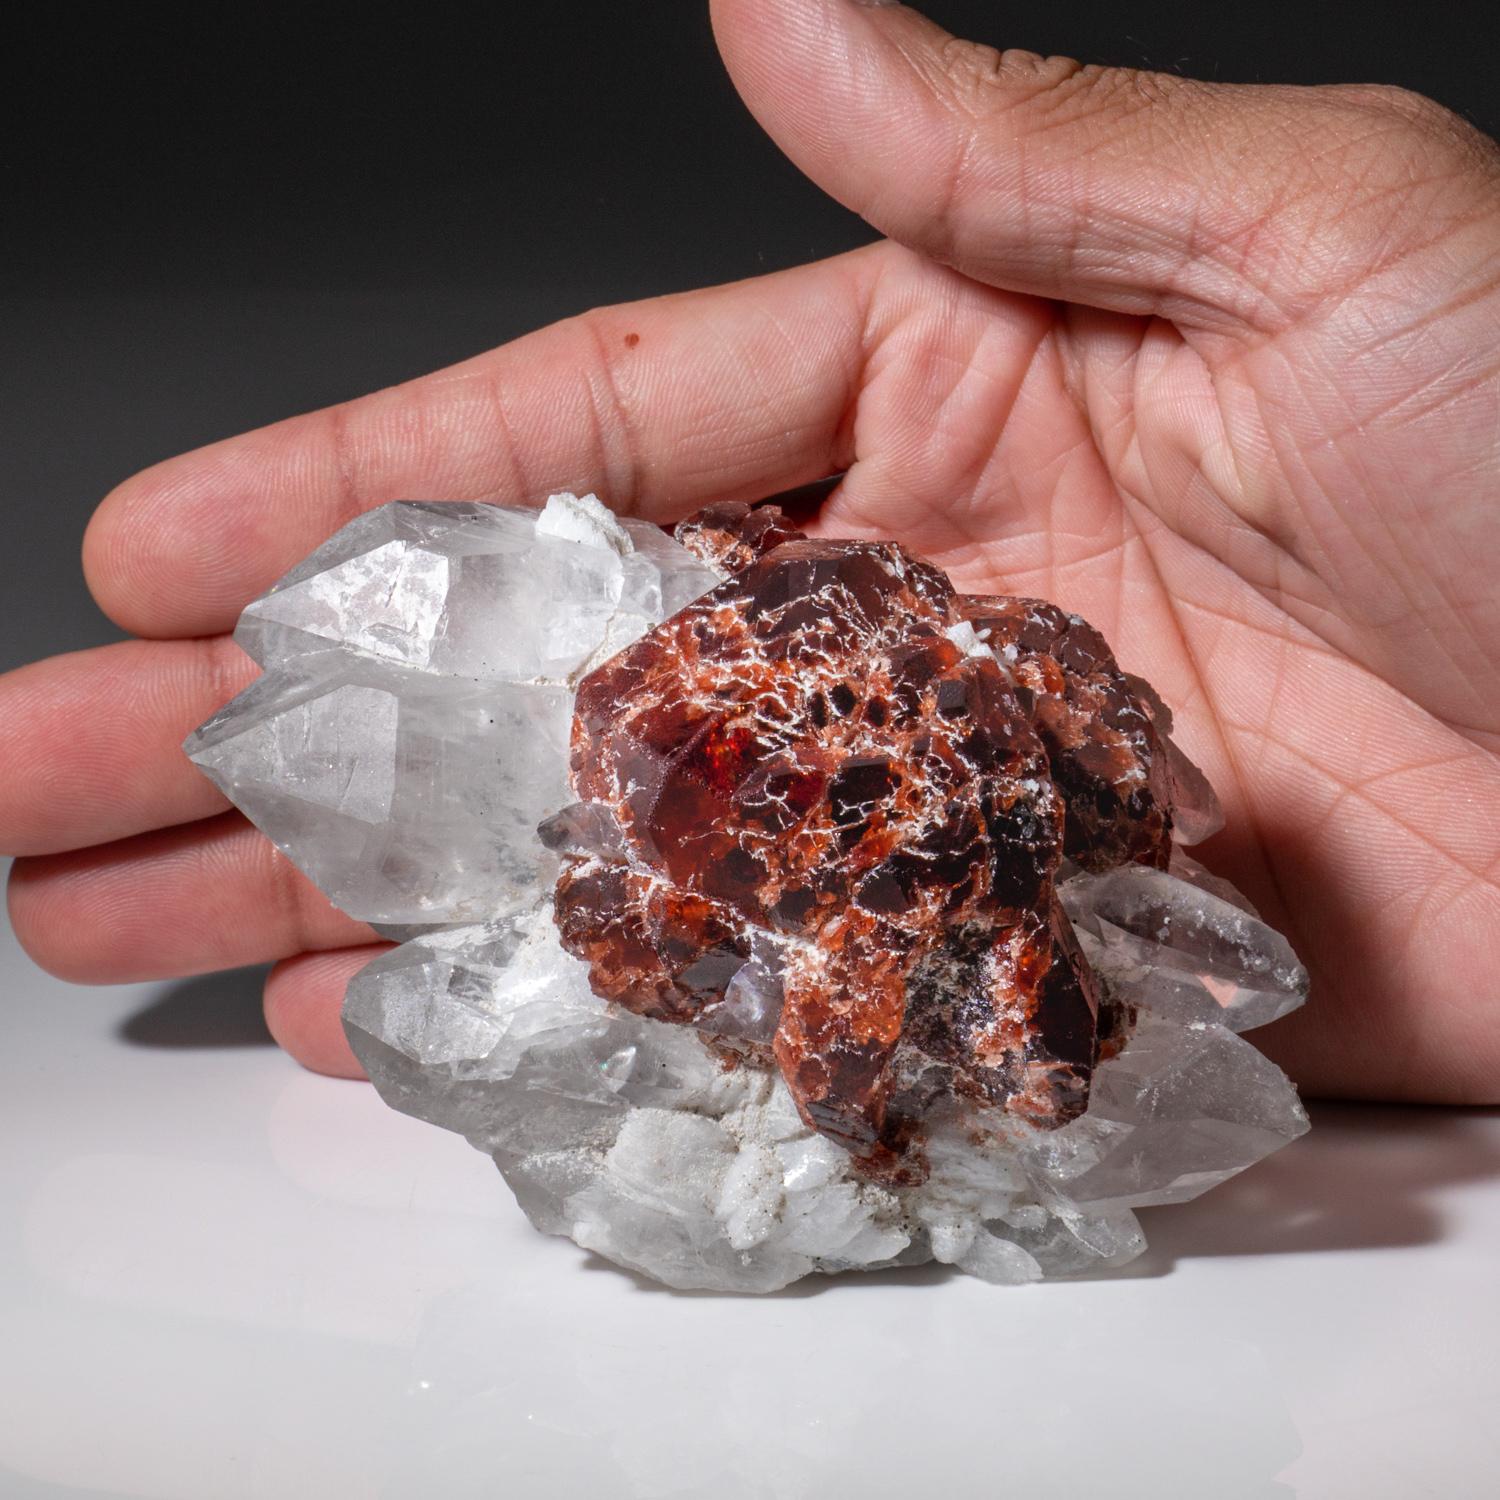 From Chhamachu, Gilgit-Skardu Road, Gilgit-Baltistan, Pakistan

Large red-brown garnet crystal with intergrown with transparent colorless quartz crystal. 

Weight: 496.4 grams, Size: 3 x 4 x 2.5 inches.